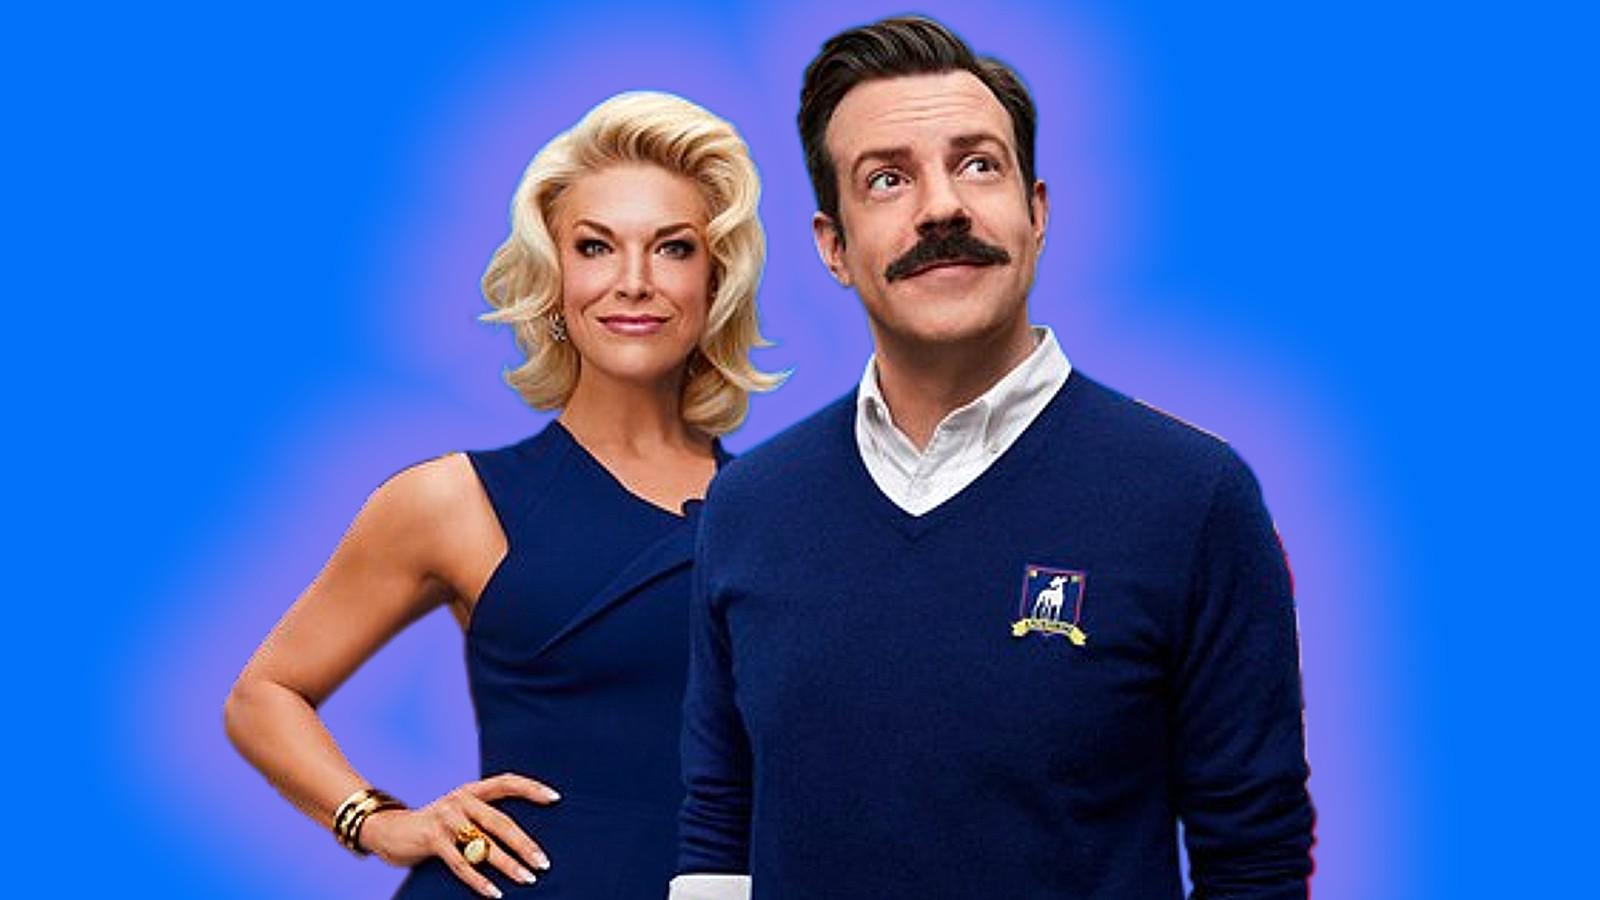 Ted and Rebecca on the Ted Lasso poster